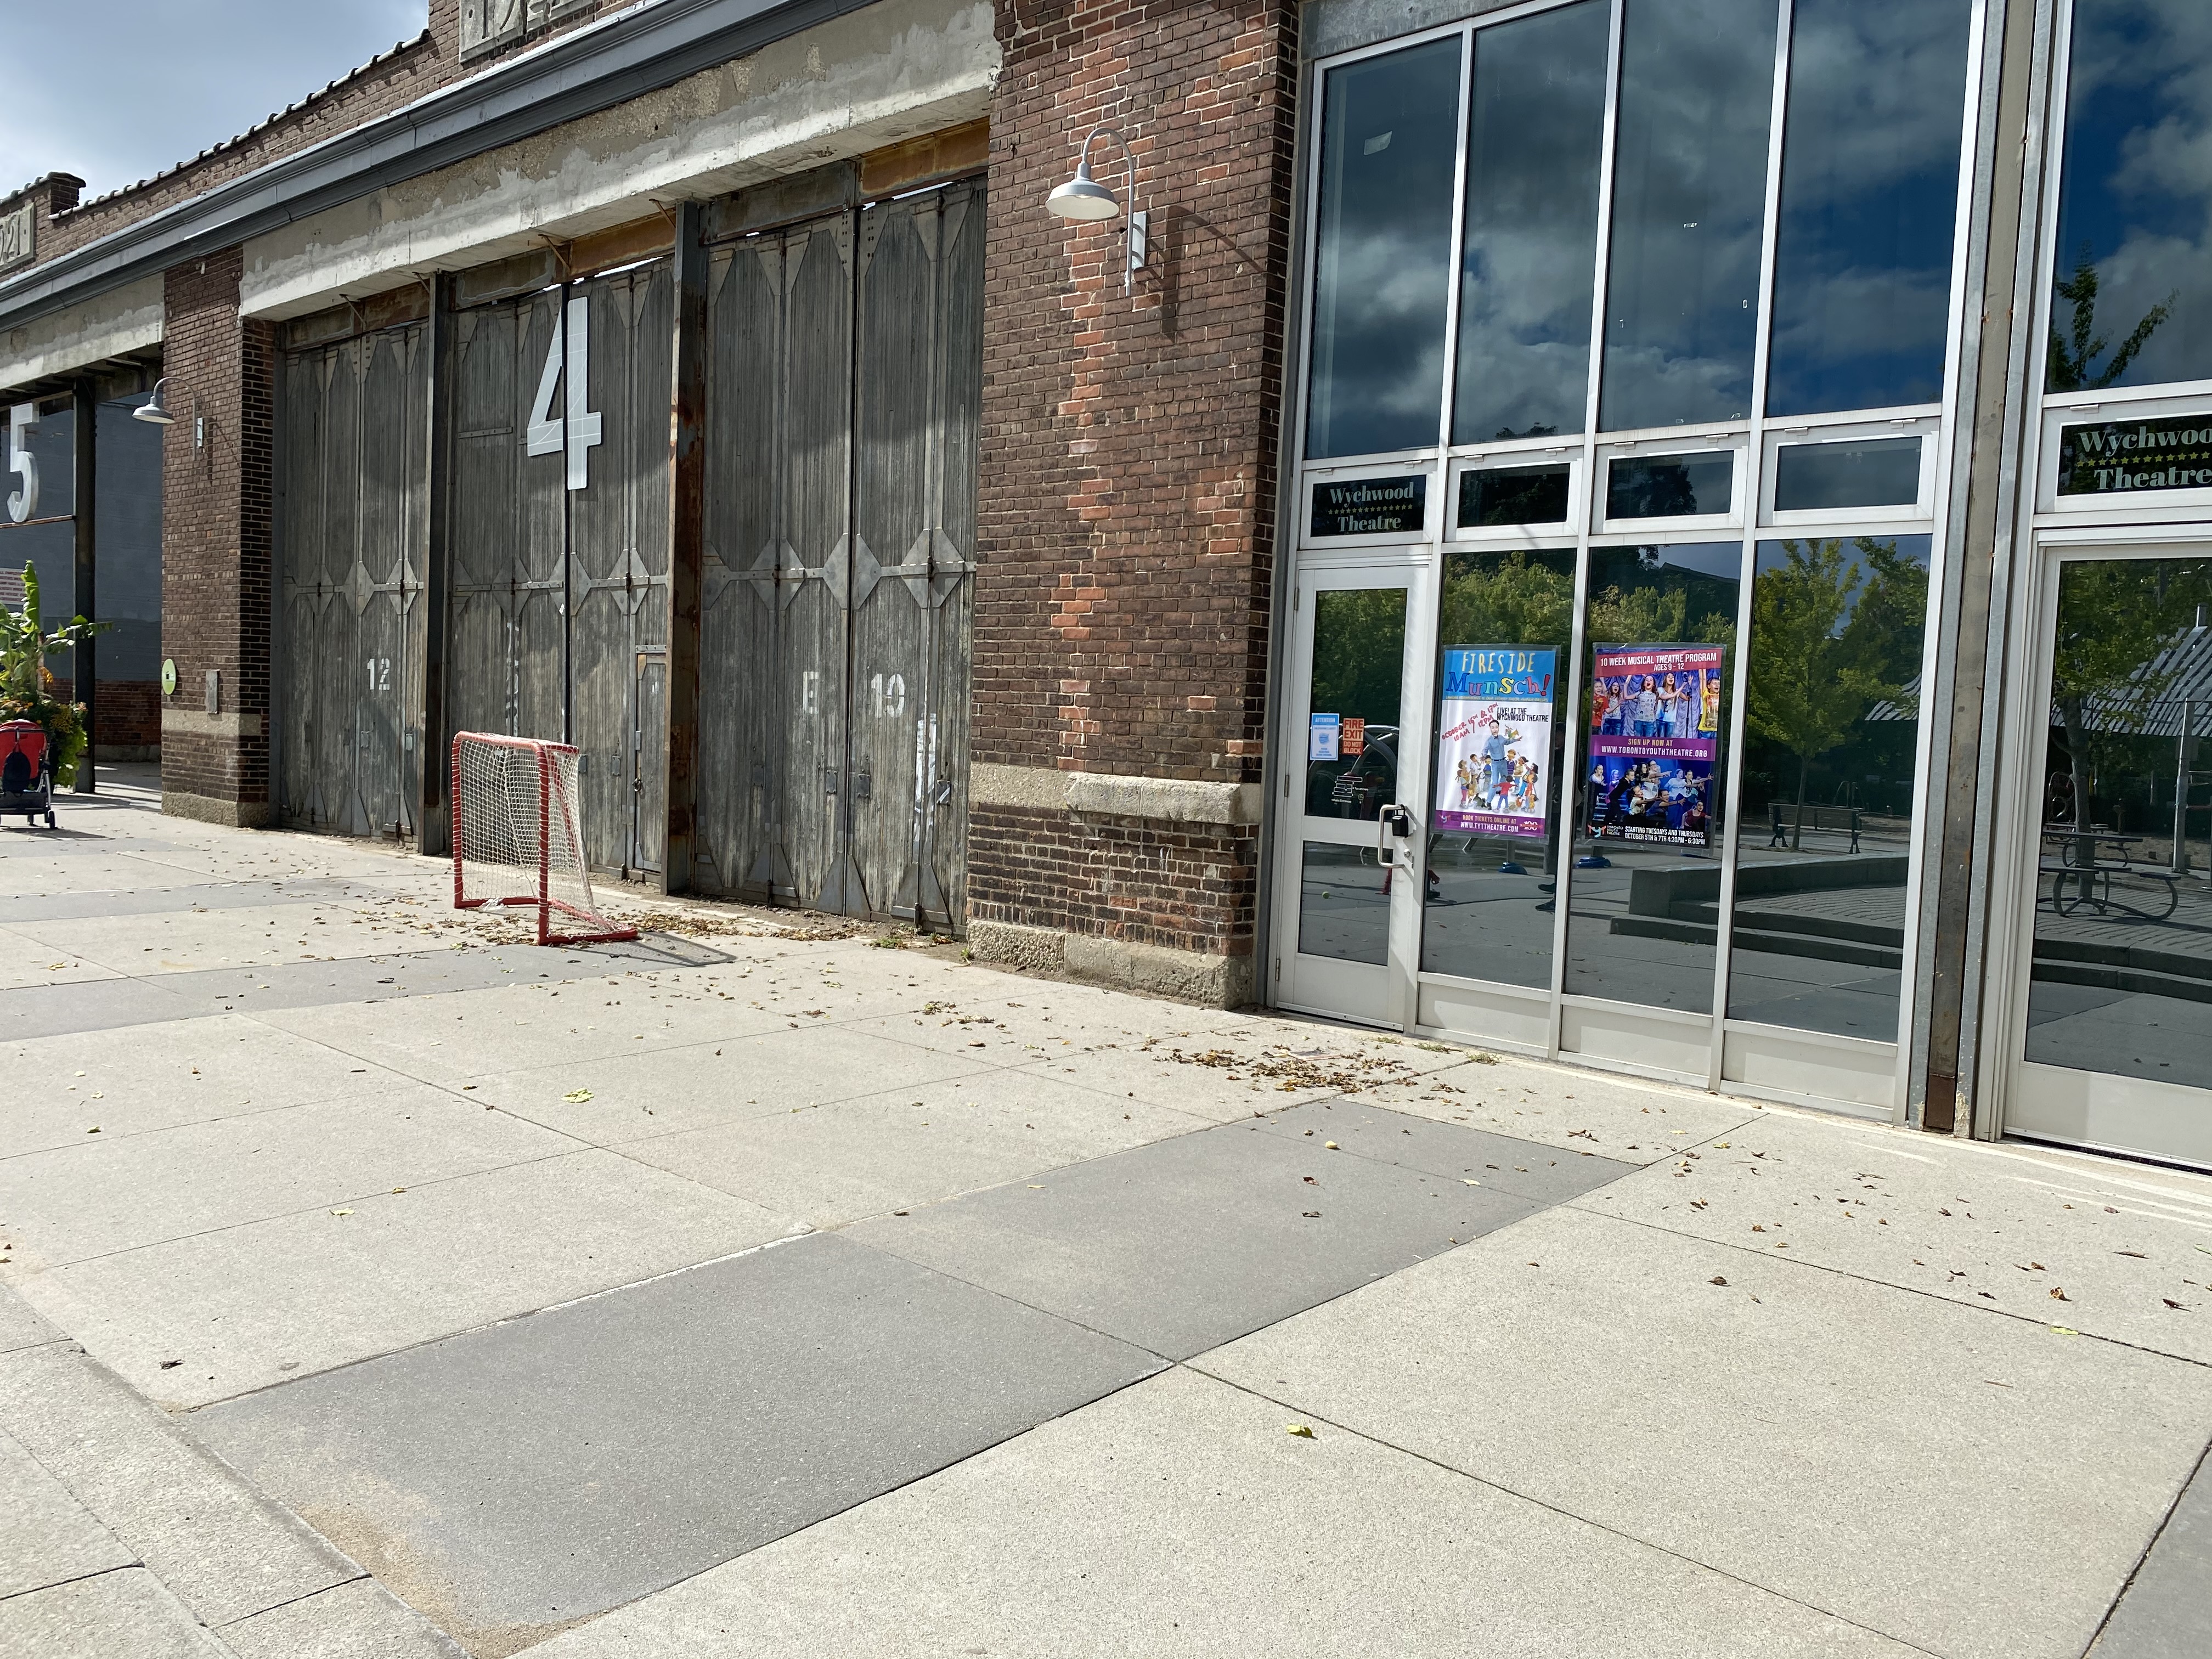 This is the area where Dis/Play will be projected. The ground features a smooth, paved surface, with grass and trees in the background, and the building landmark is the door to Barn 4, on the side of ArtScape Wychwood Barns.